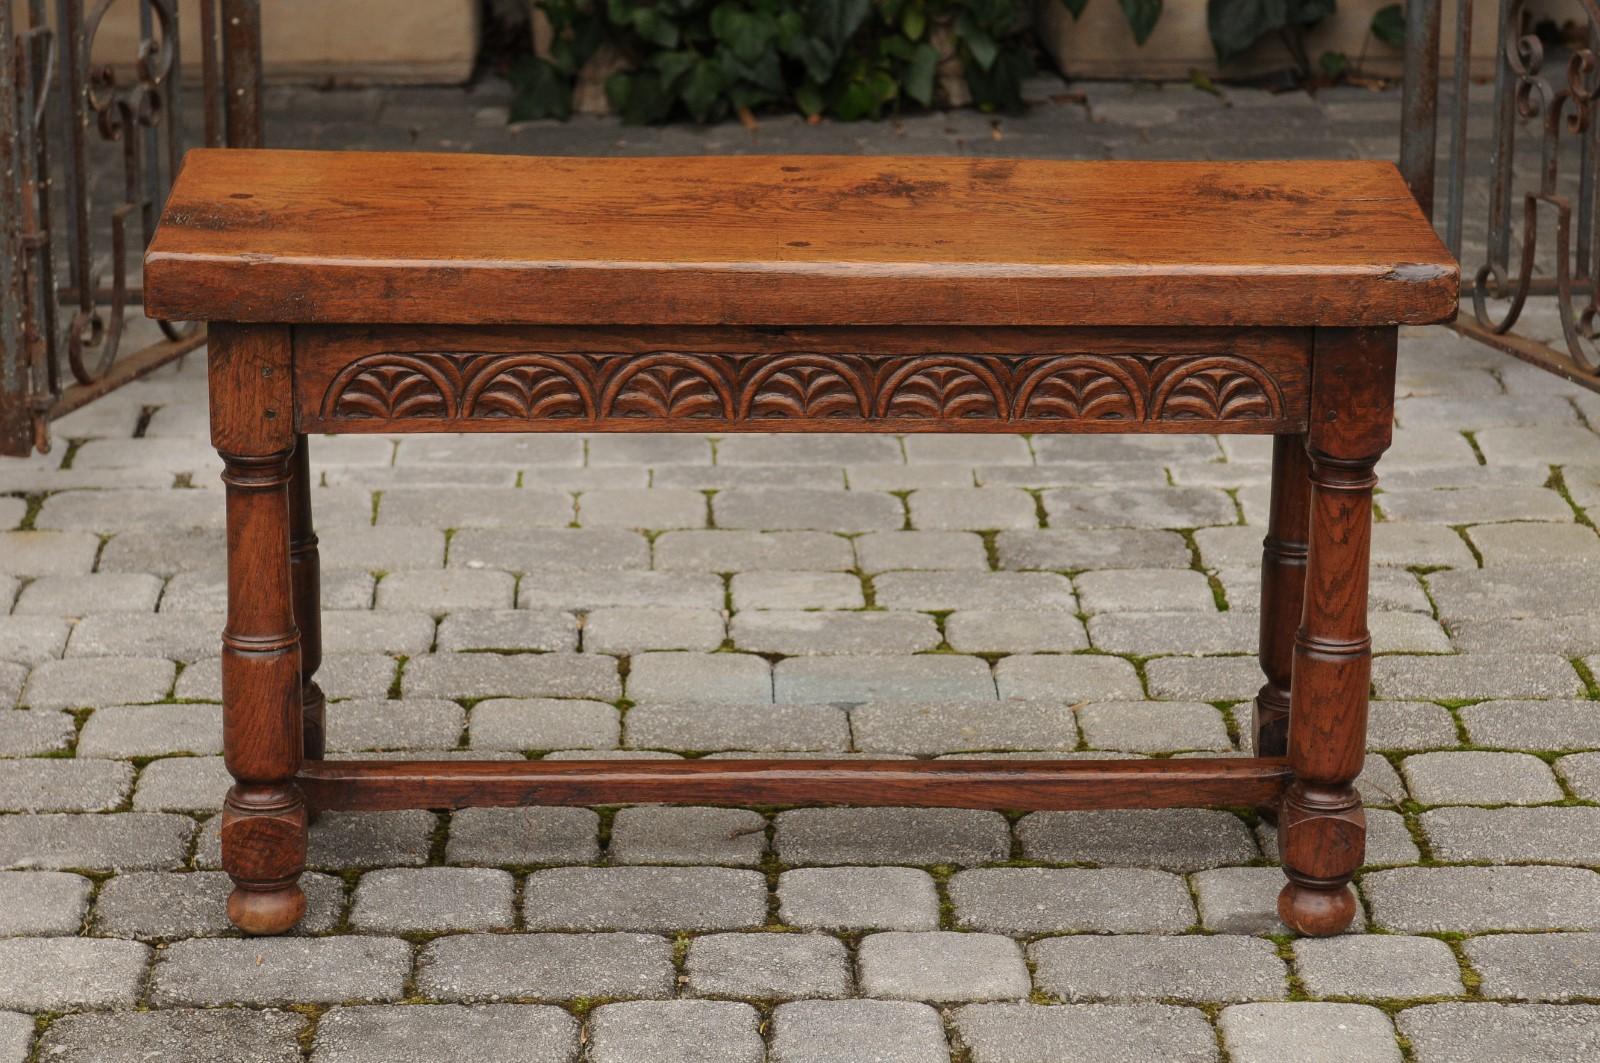 An English oak bench from the late 19th century, with low-relief carved decor, column-shaped turned legs and cross stretcher. Born in England towards the end of the 19th century, this oak bench distinguishes itself with its rectangular top and